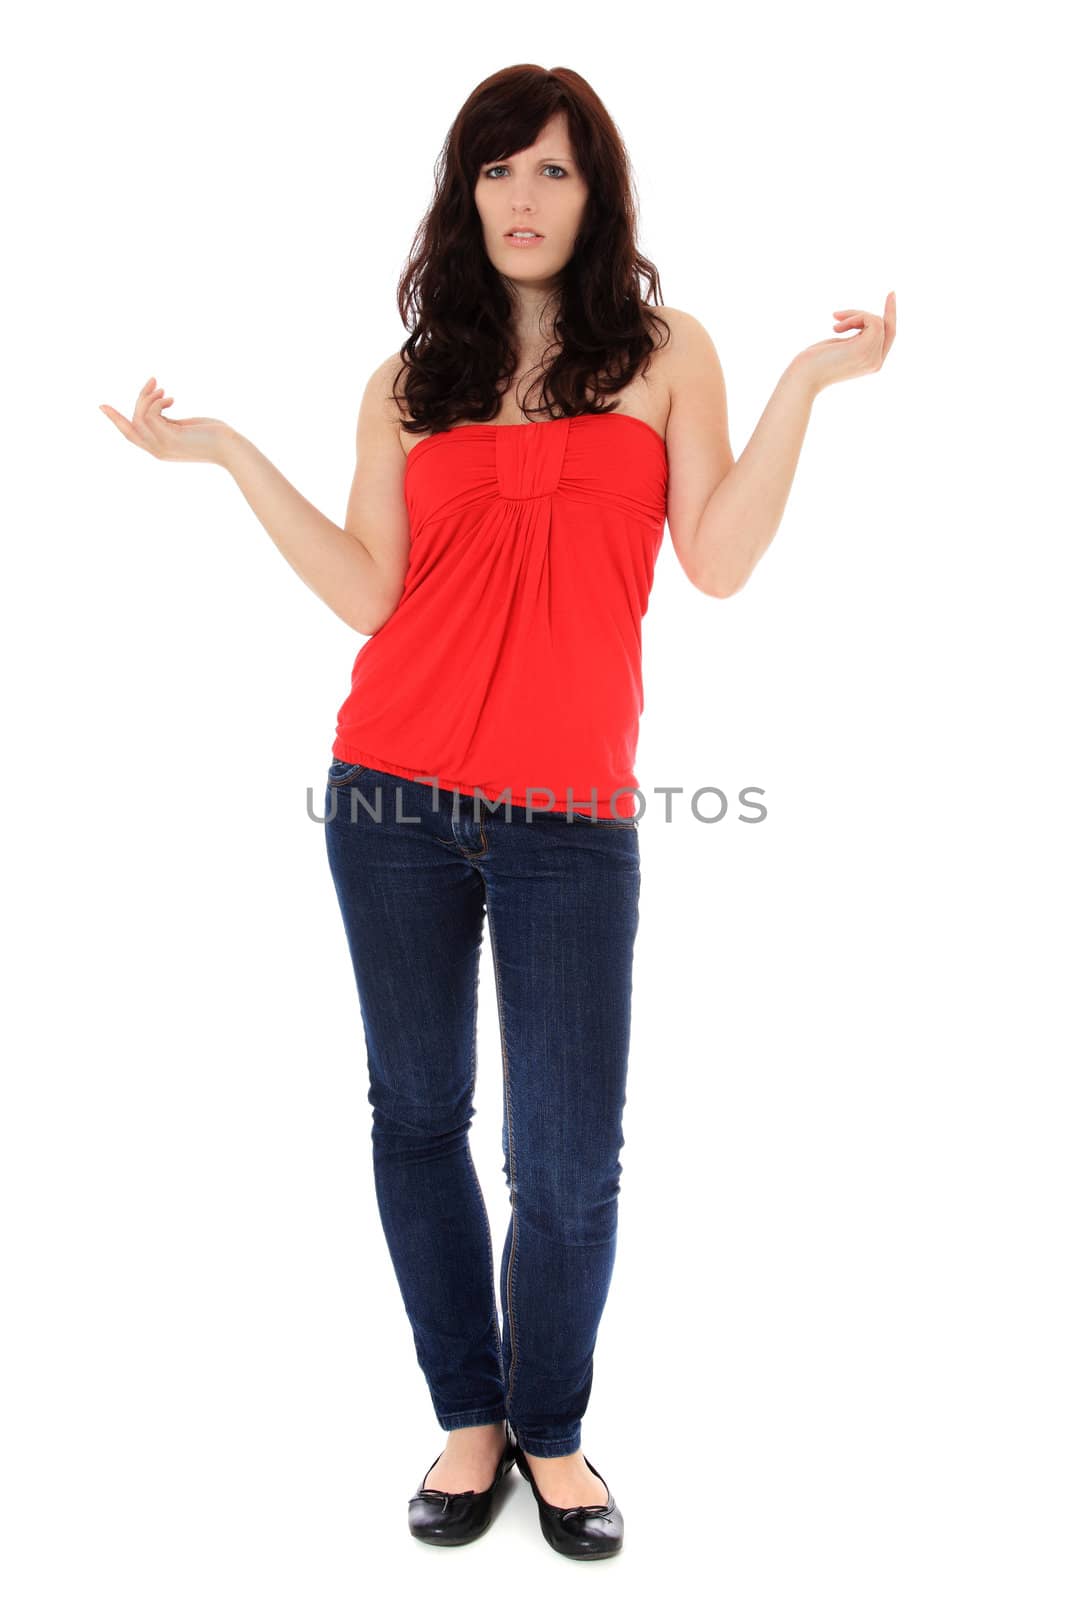 Clueless young woman. All on white background.